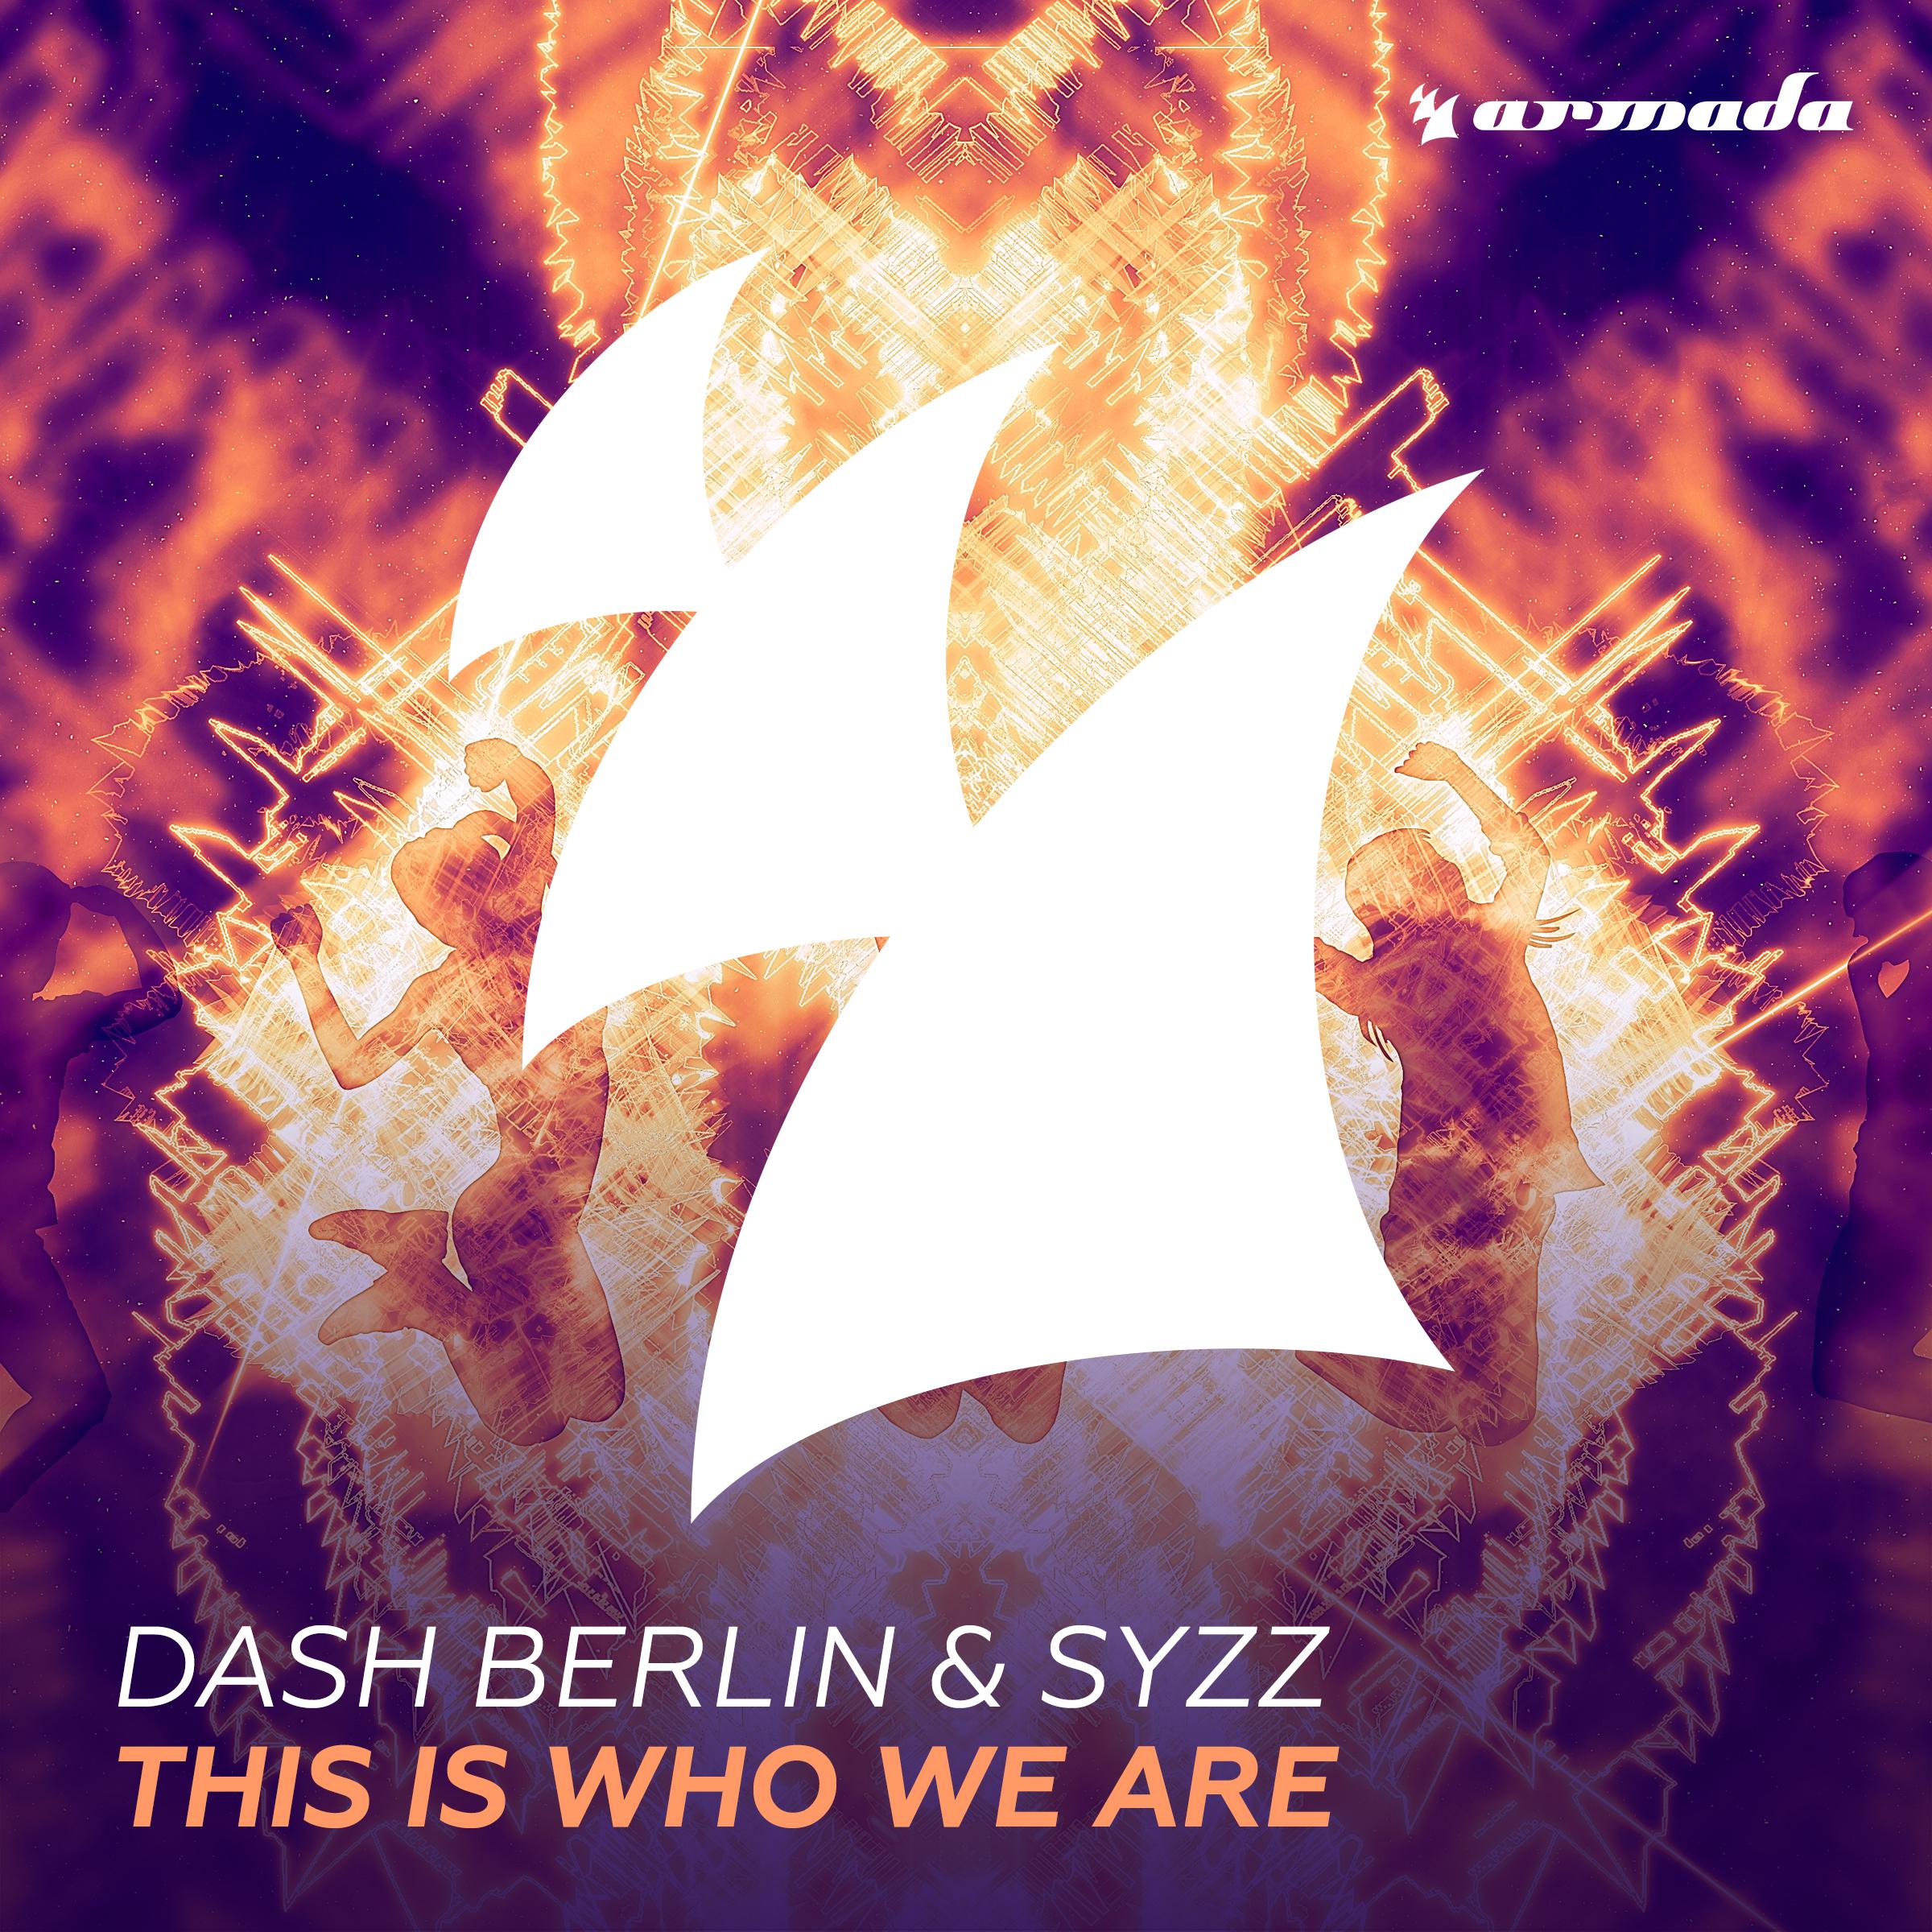 This Is Who We Are歌词 歌手Dash Berlin / Syzz-专辑This Is Who We Are-单曲《This Is Who We Are》LRC歌词下载